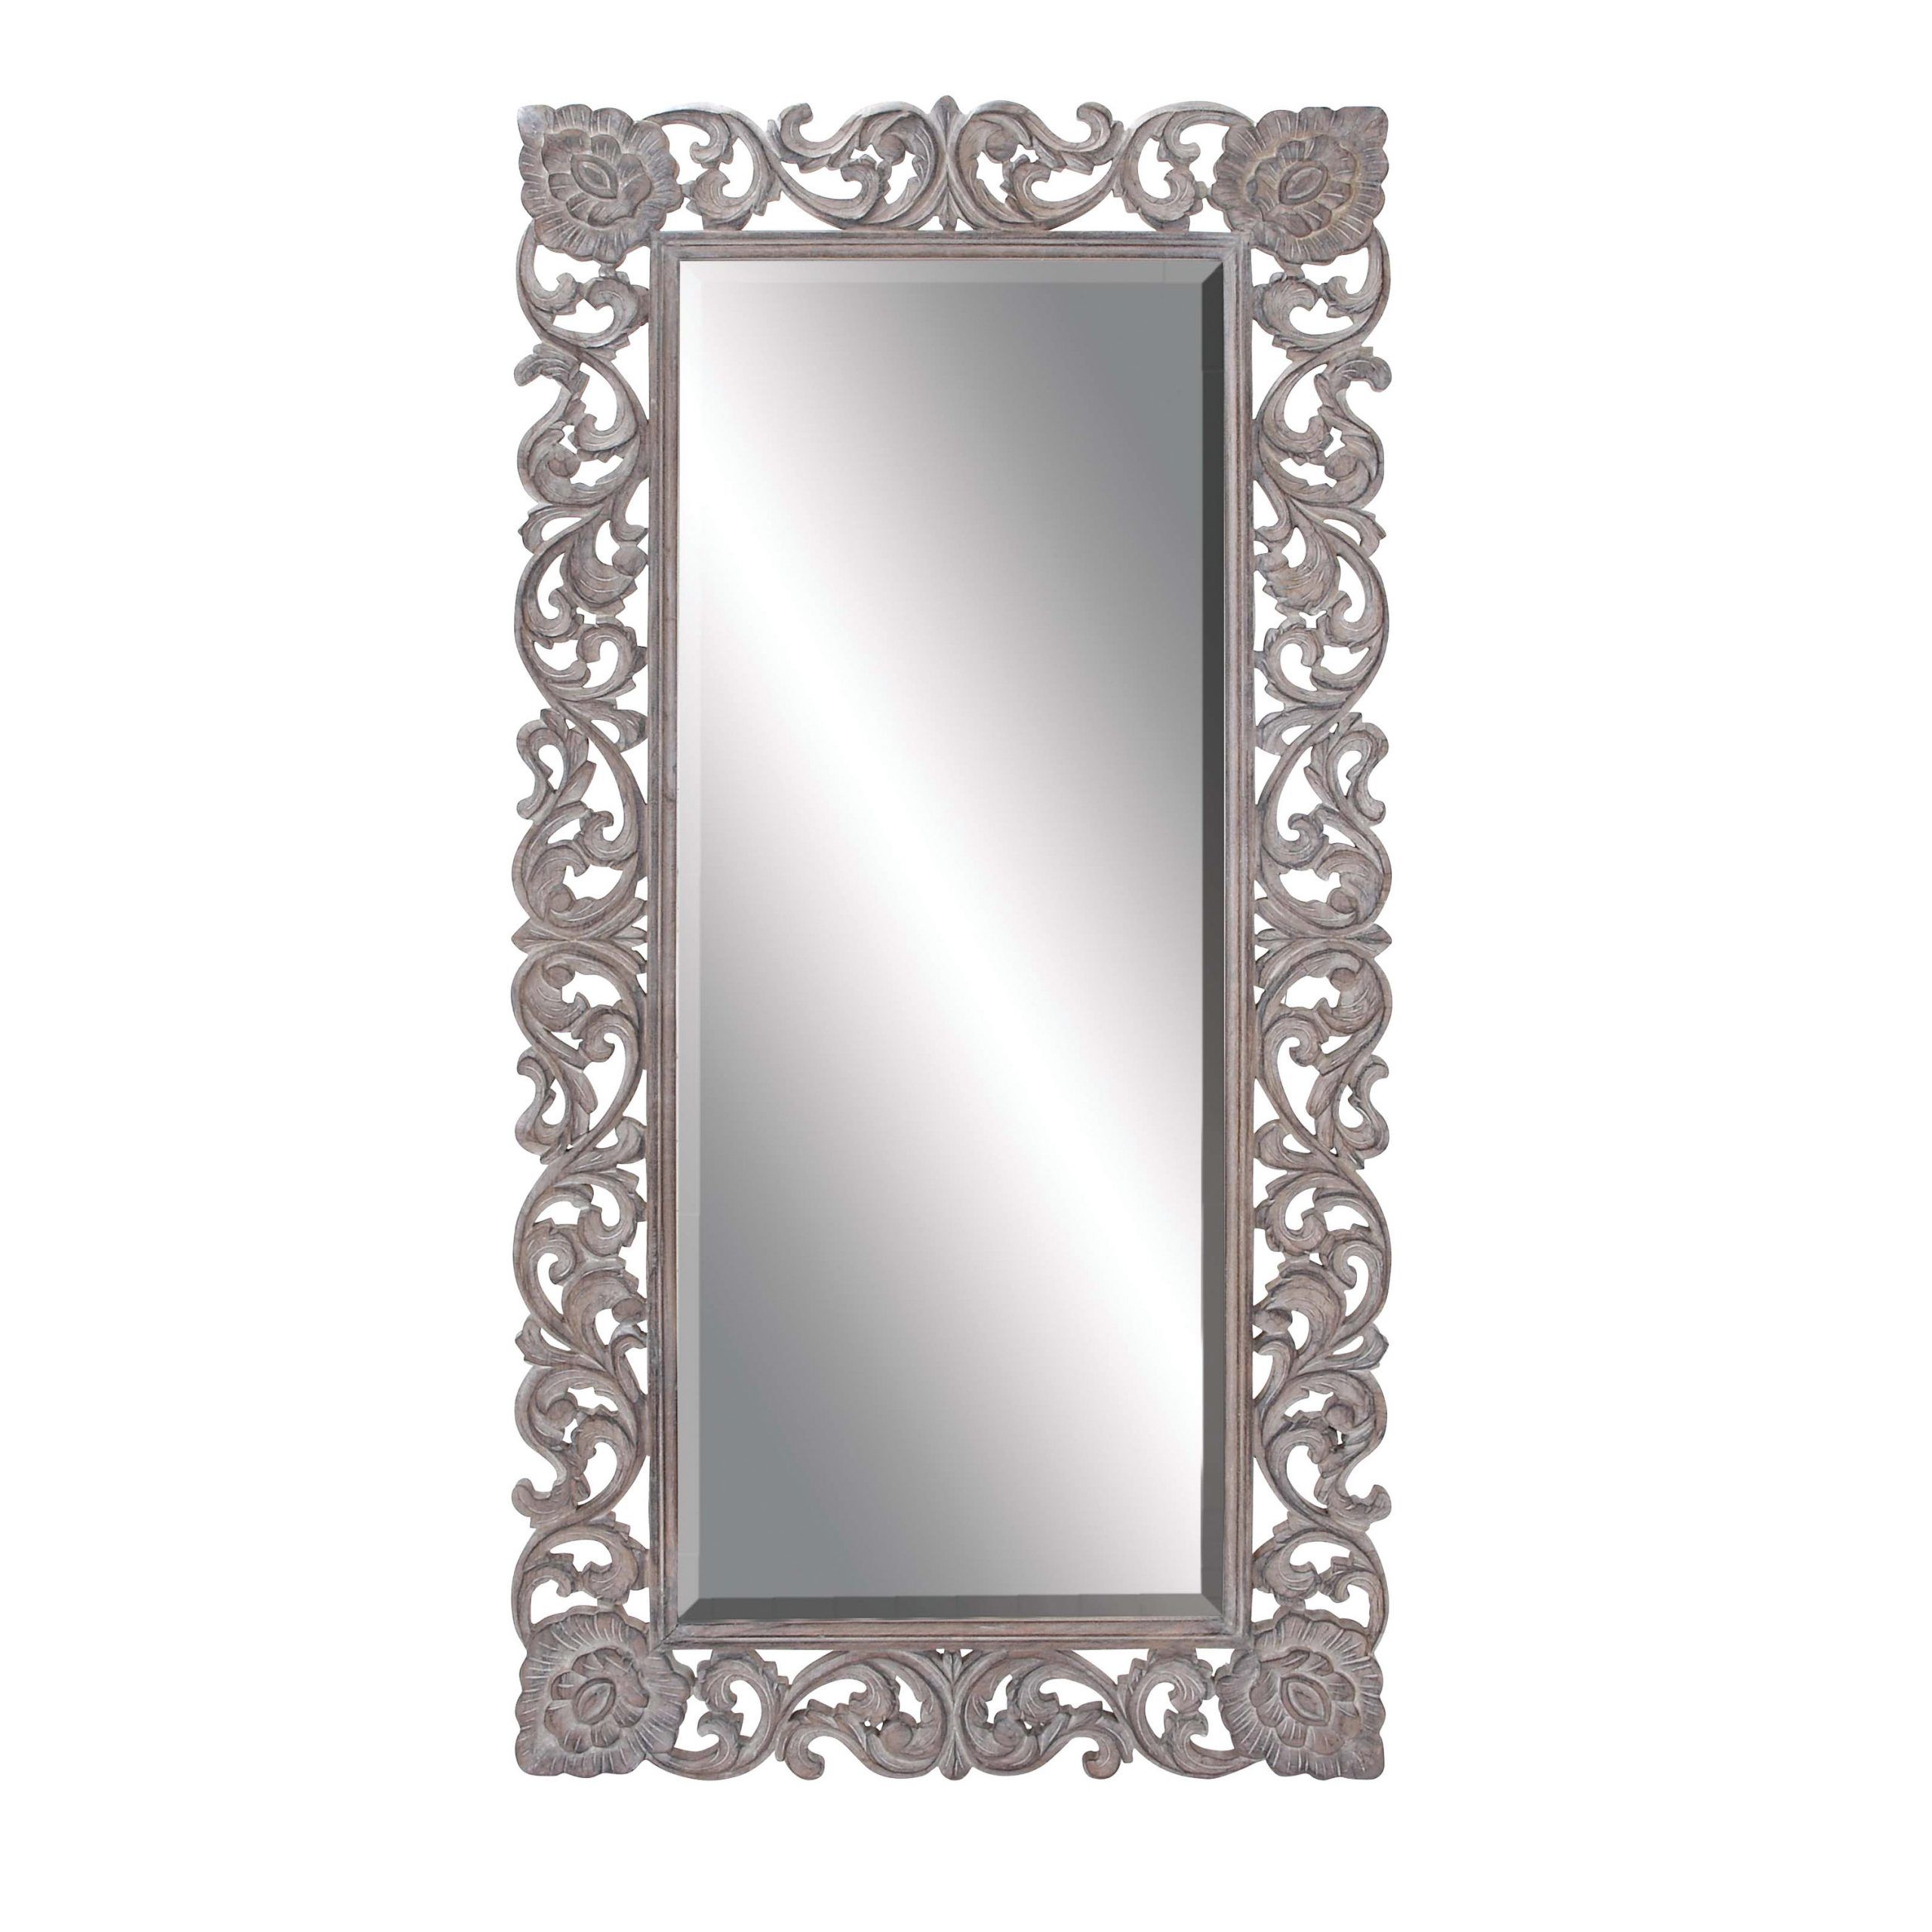 Decmode Full Length Rectangular Distressed Grey Wood Carved Frame Wall Pertaining To Most Popular Mahogany Full Length Mirrors (View 6 of 15)